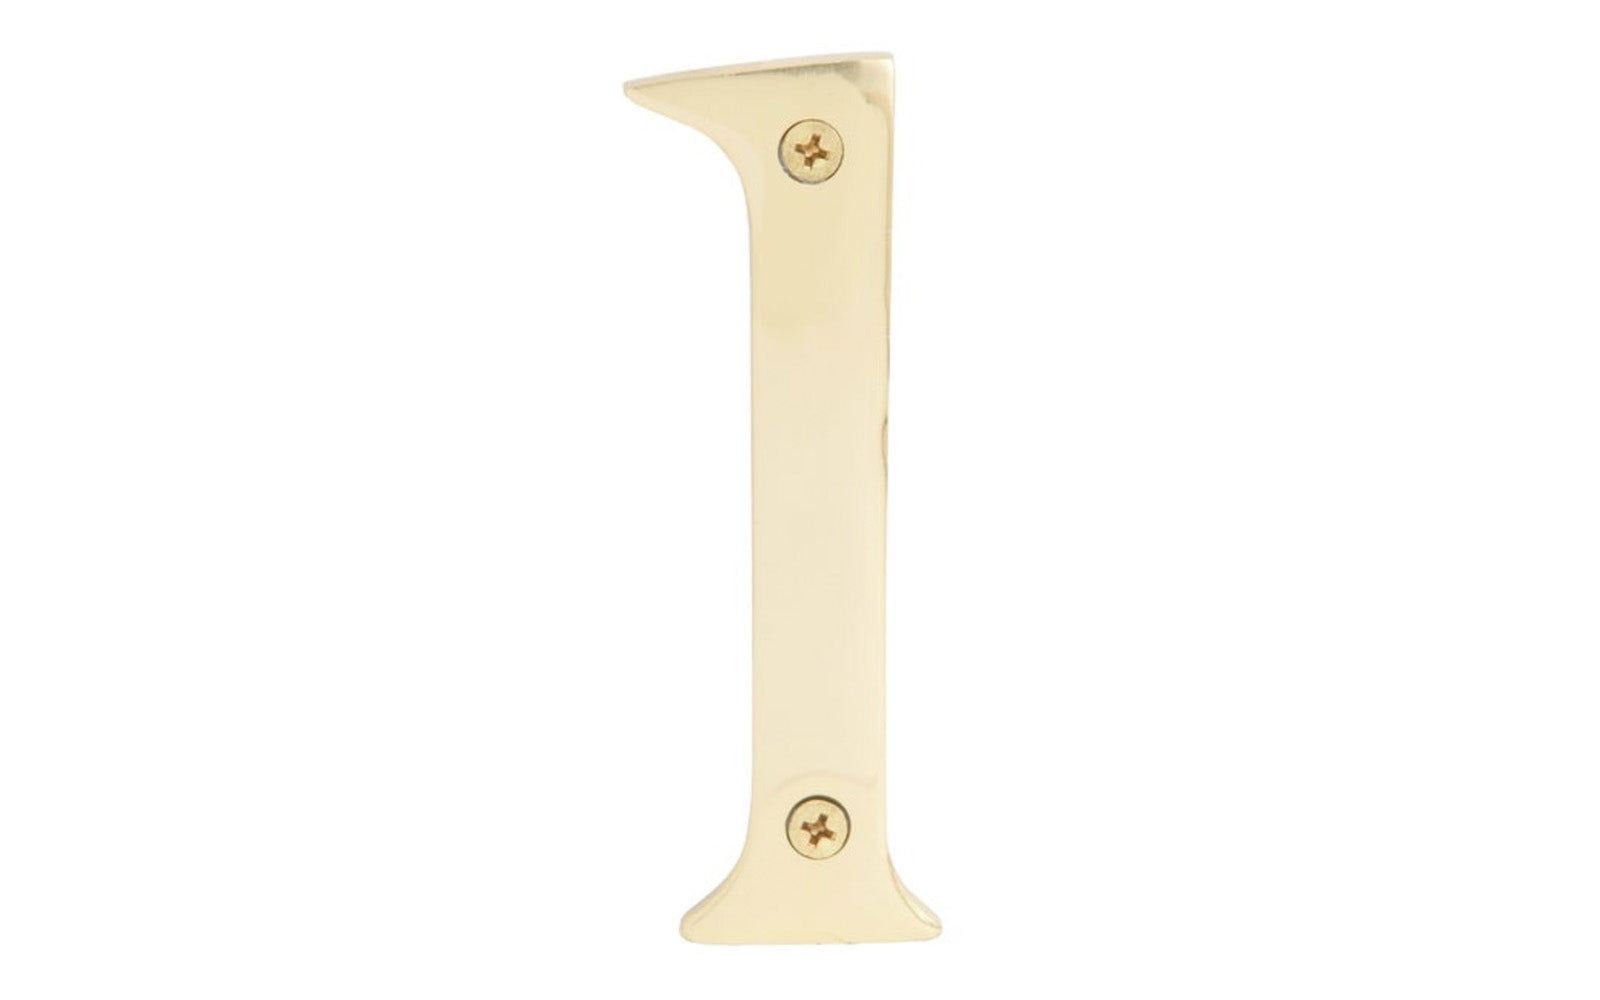 Number One Solid Brass House Number in a 4" Size. Made of solid brass material - 1/4" thickness. Lacquered brass finish. Includes two flat head phillips screws. #1 House Number. Hy-Ko Model No. BR-90/1. 029069104917